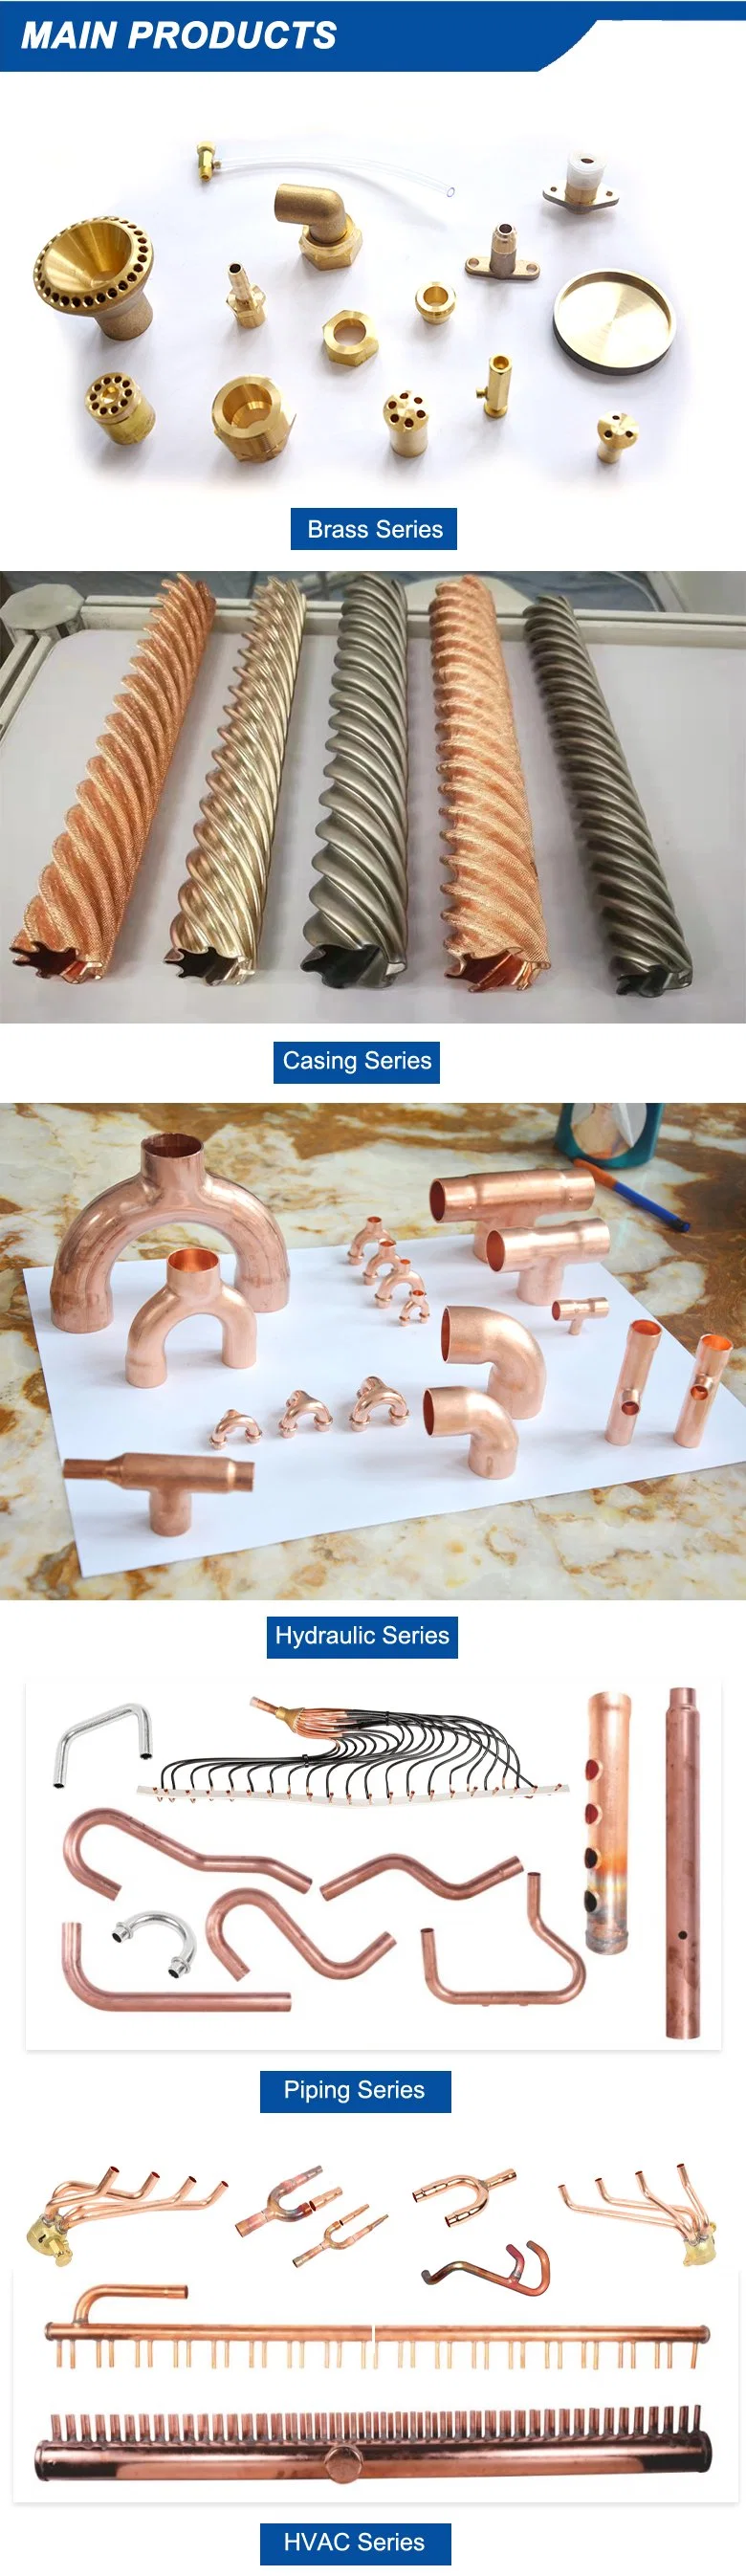 Round Tee Tube Connector Three Way Pipe Fittings for Railing Balustrade